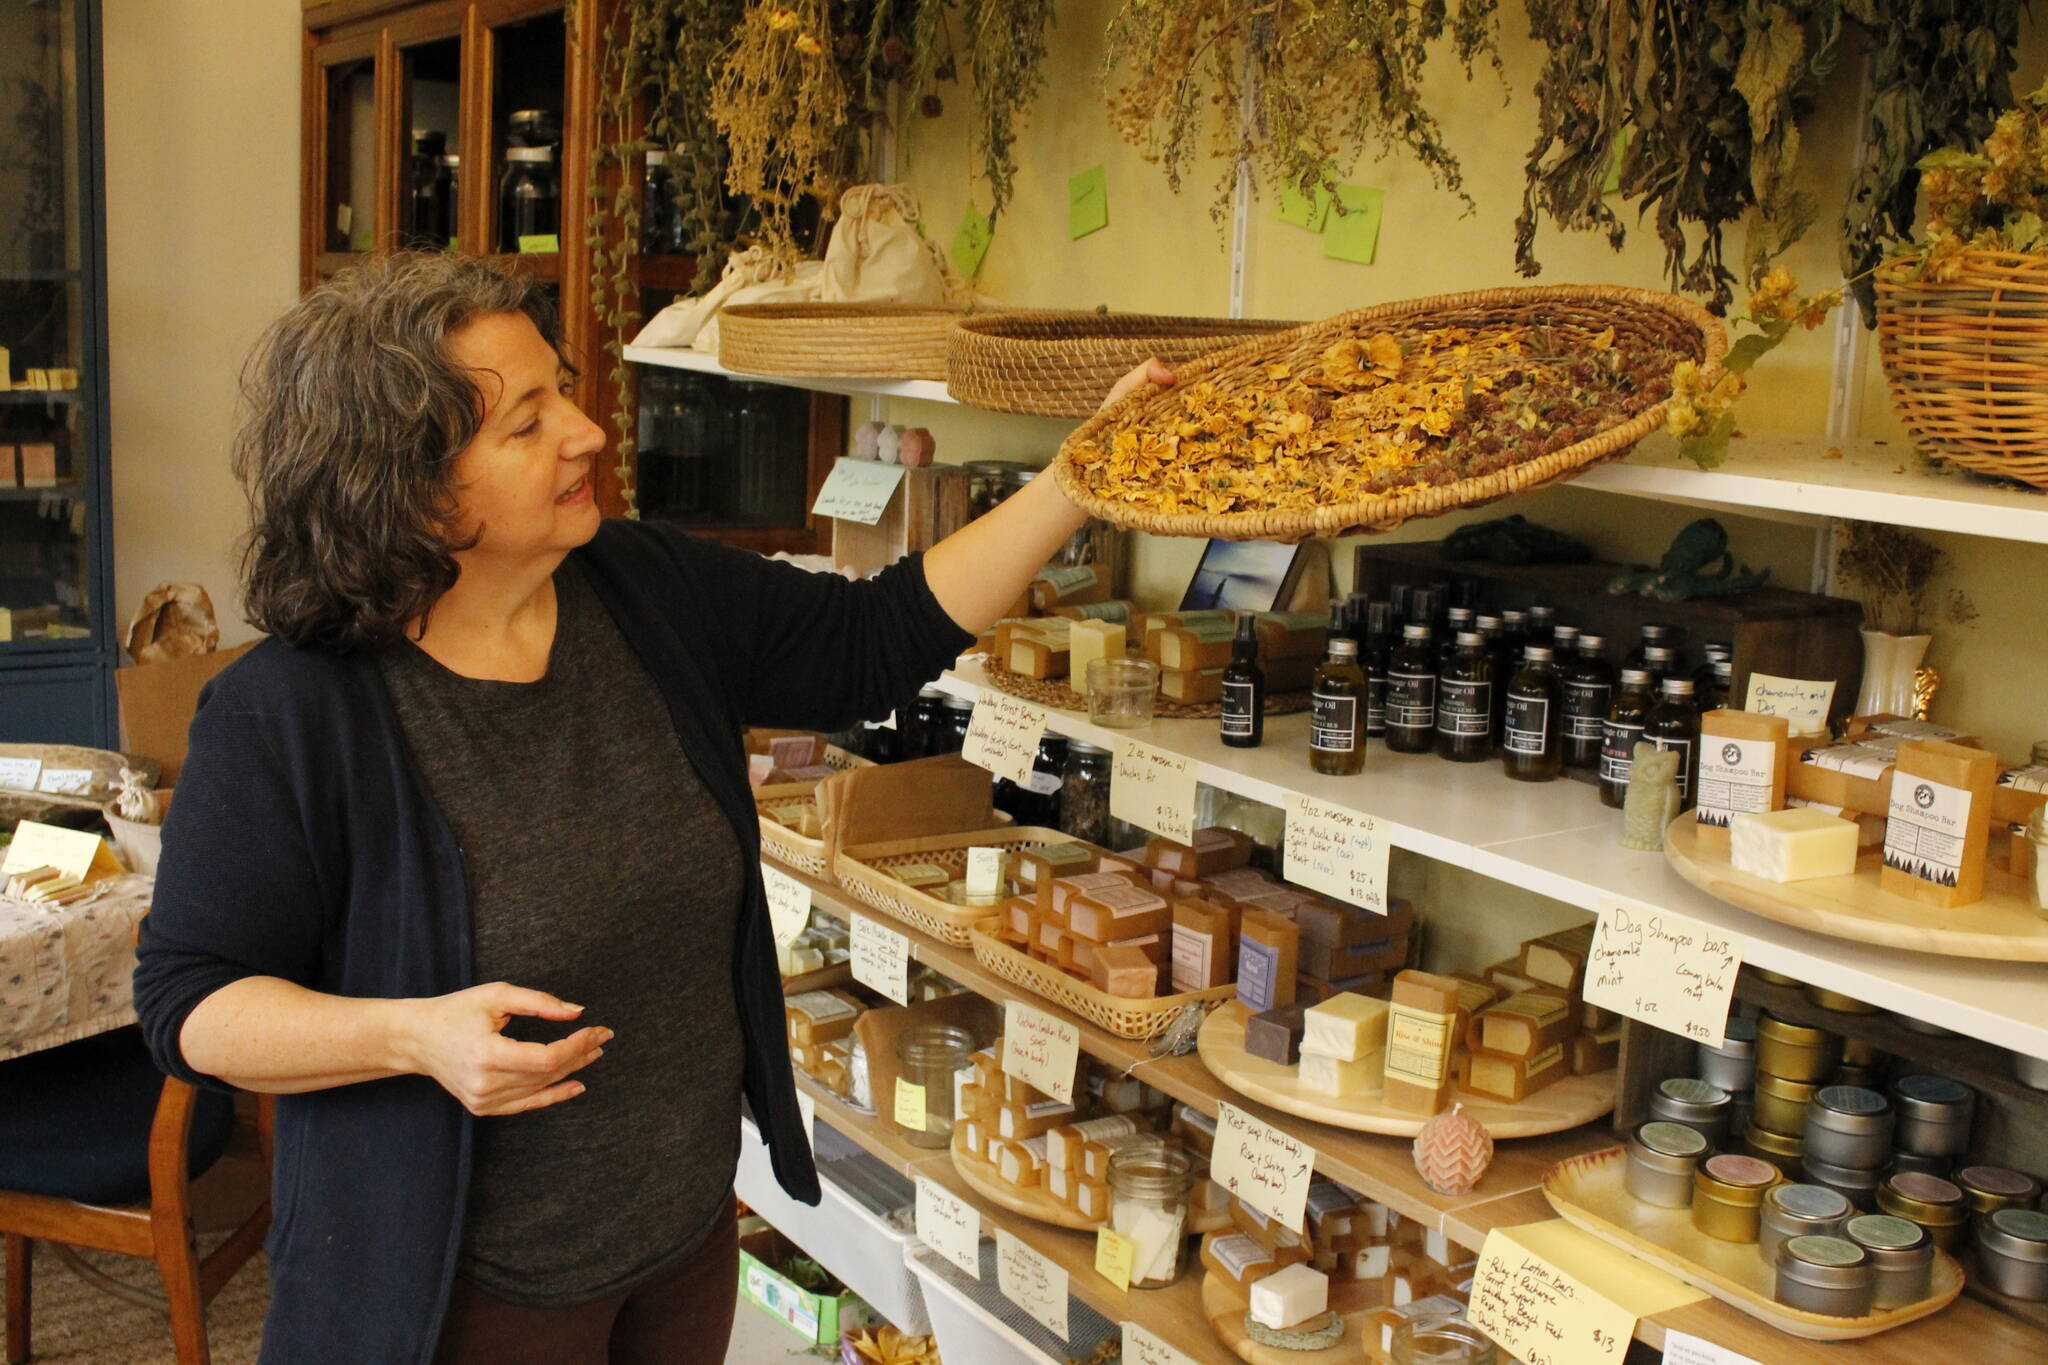 Photos by Kira Erickson/South Whidbey Record
Herbalist Lori Kane arranges a display in her studio.